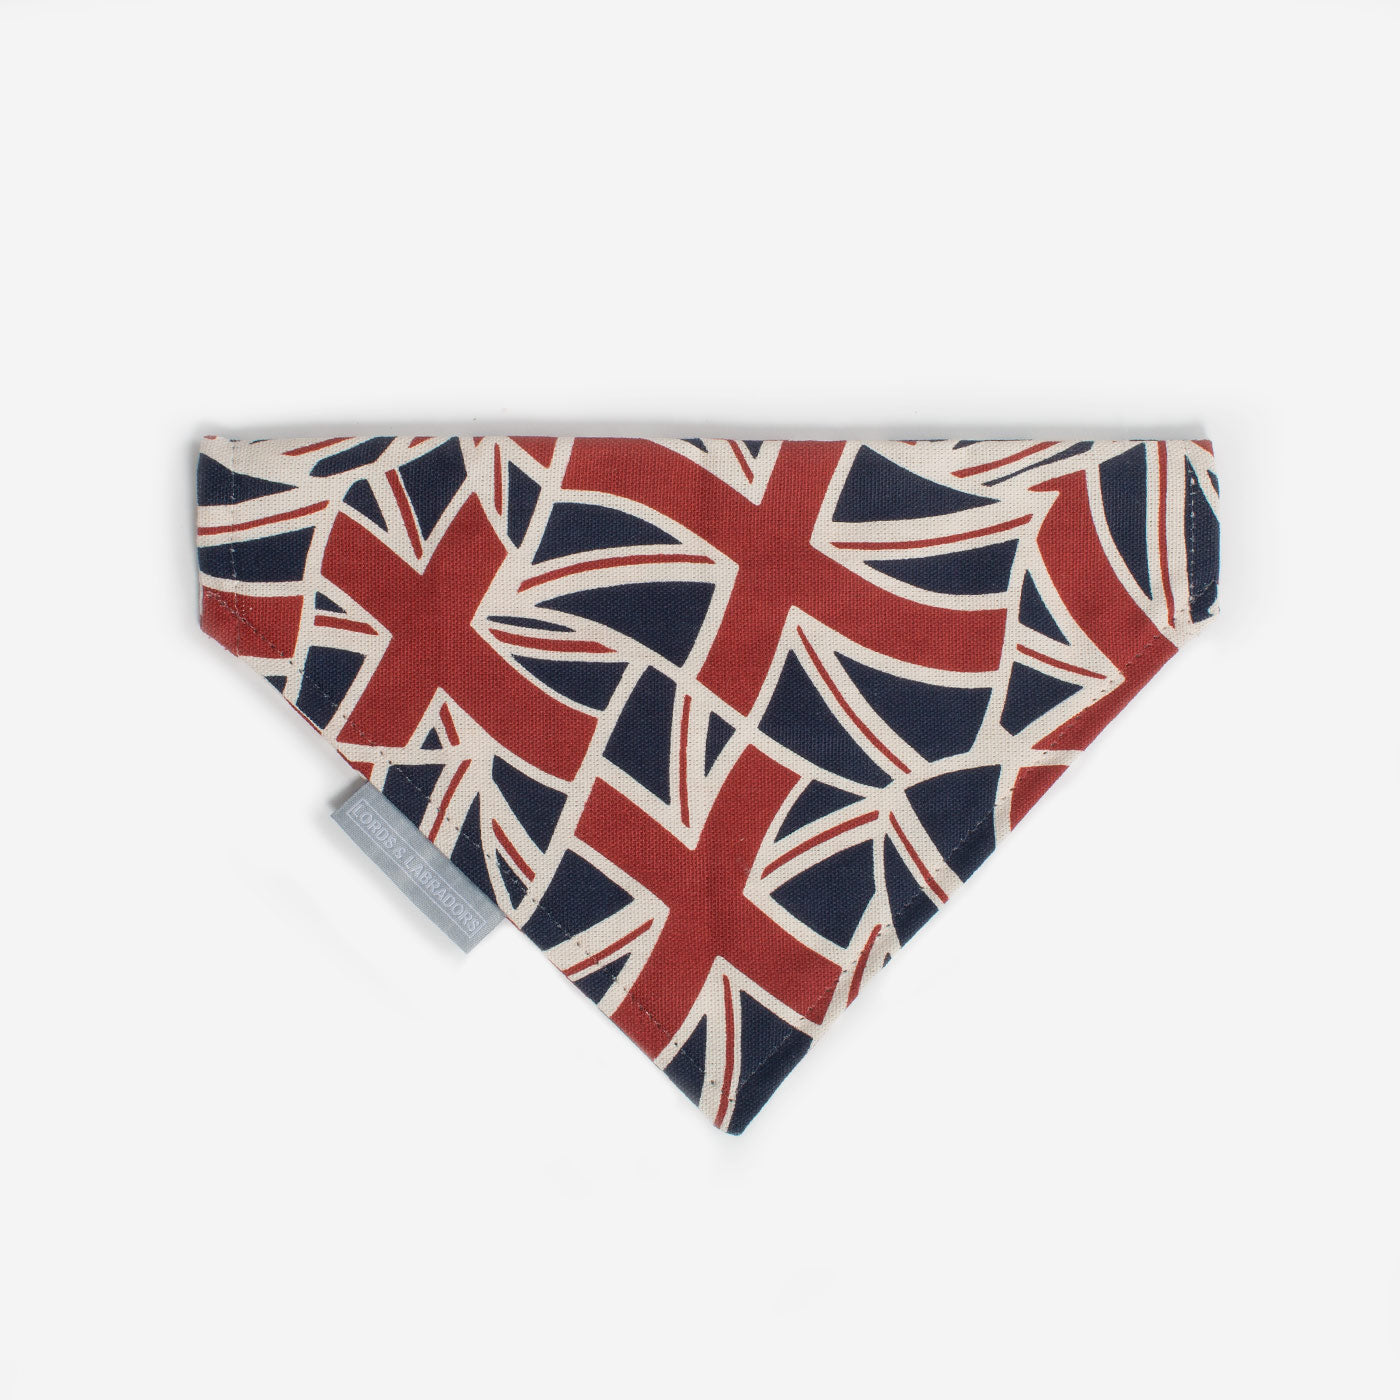 Discover The Perfect Bandana For Dogs, Luxury Dog Bandana In Union Jack, Available To Personalize Now at Lords & Labradors US